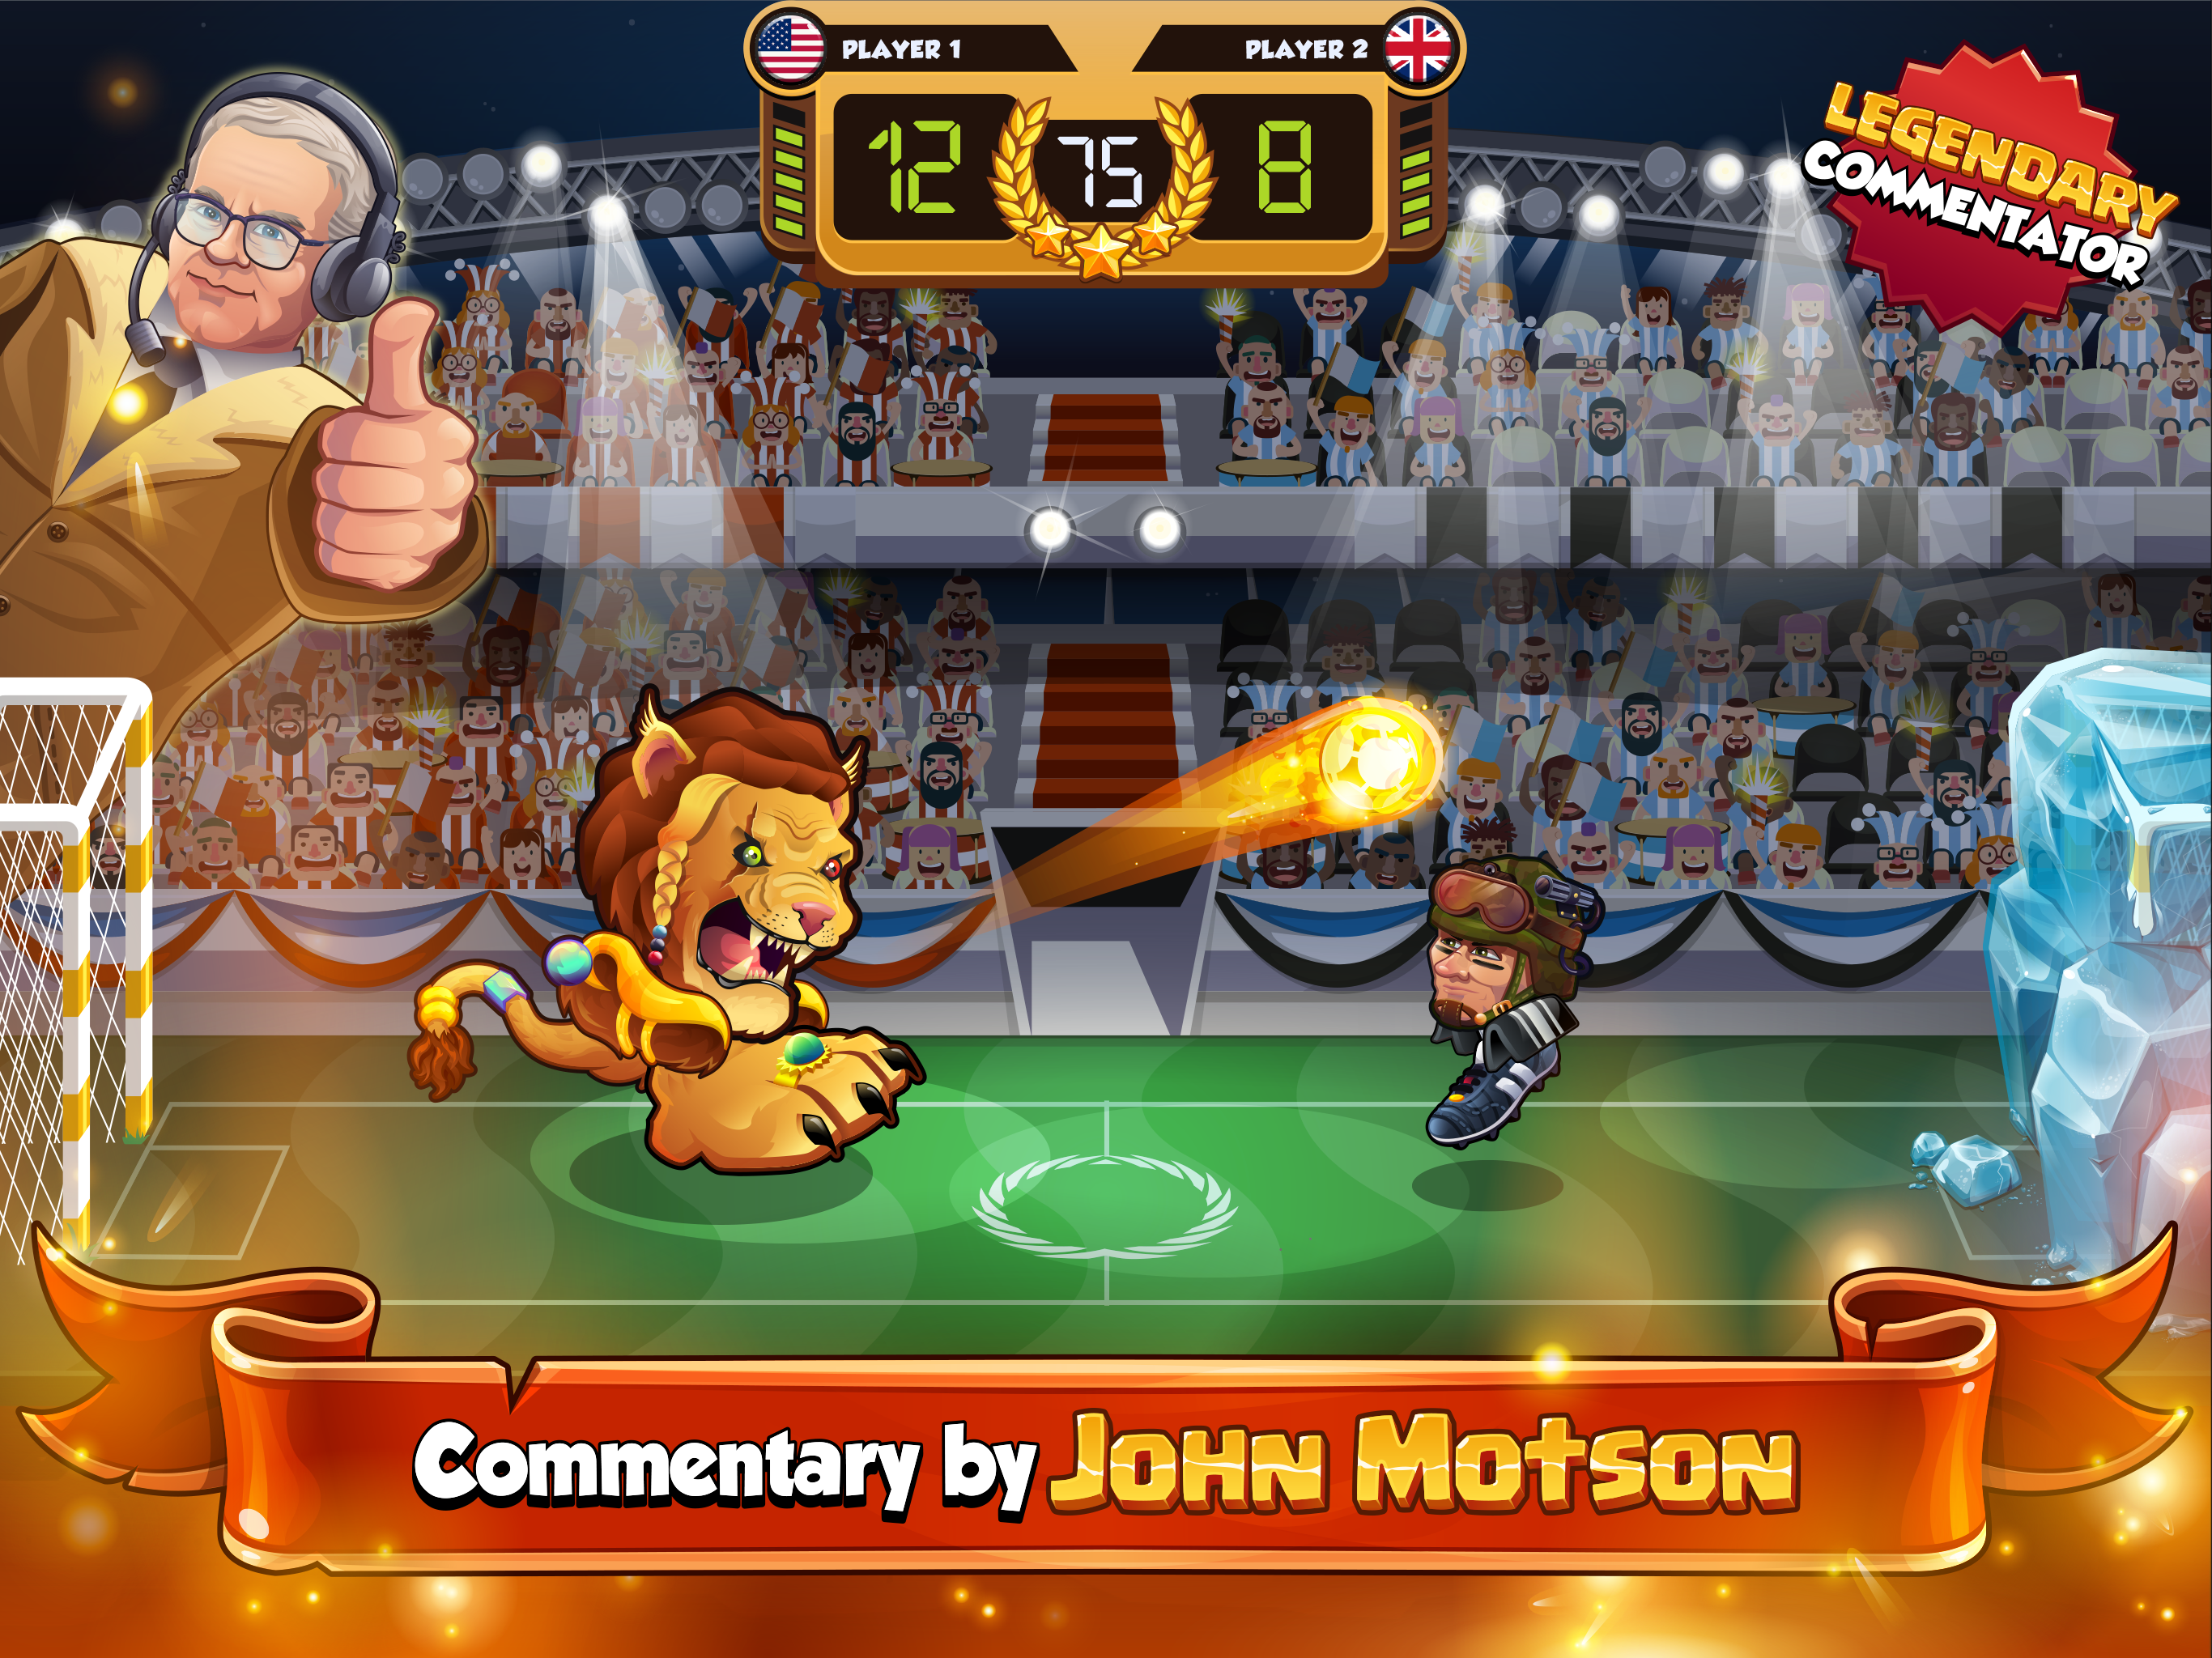 Head Ball 2 for Android - APK Download - 